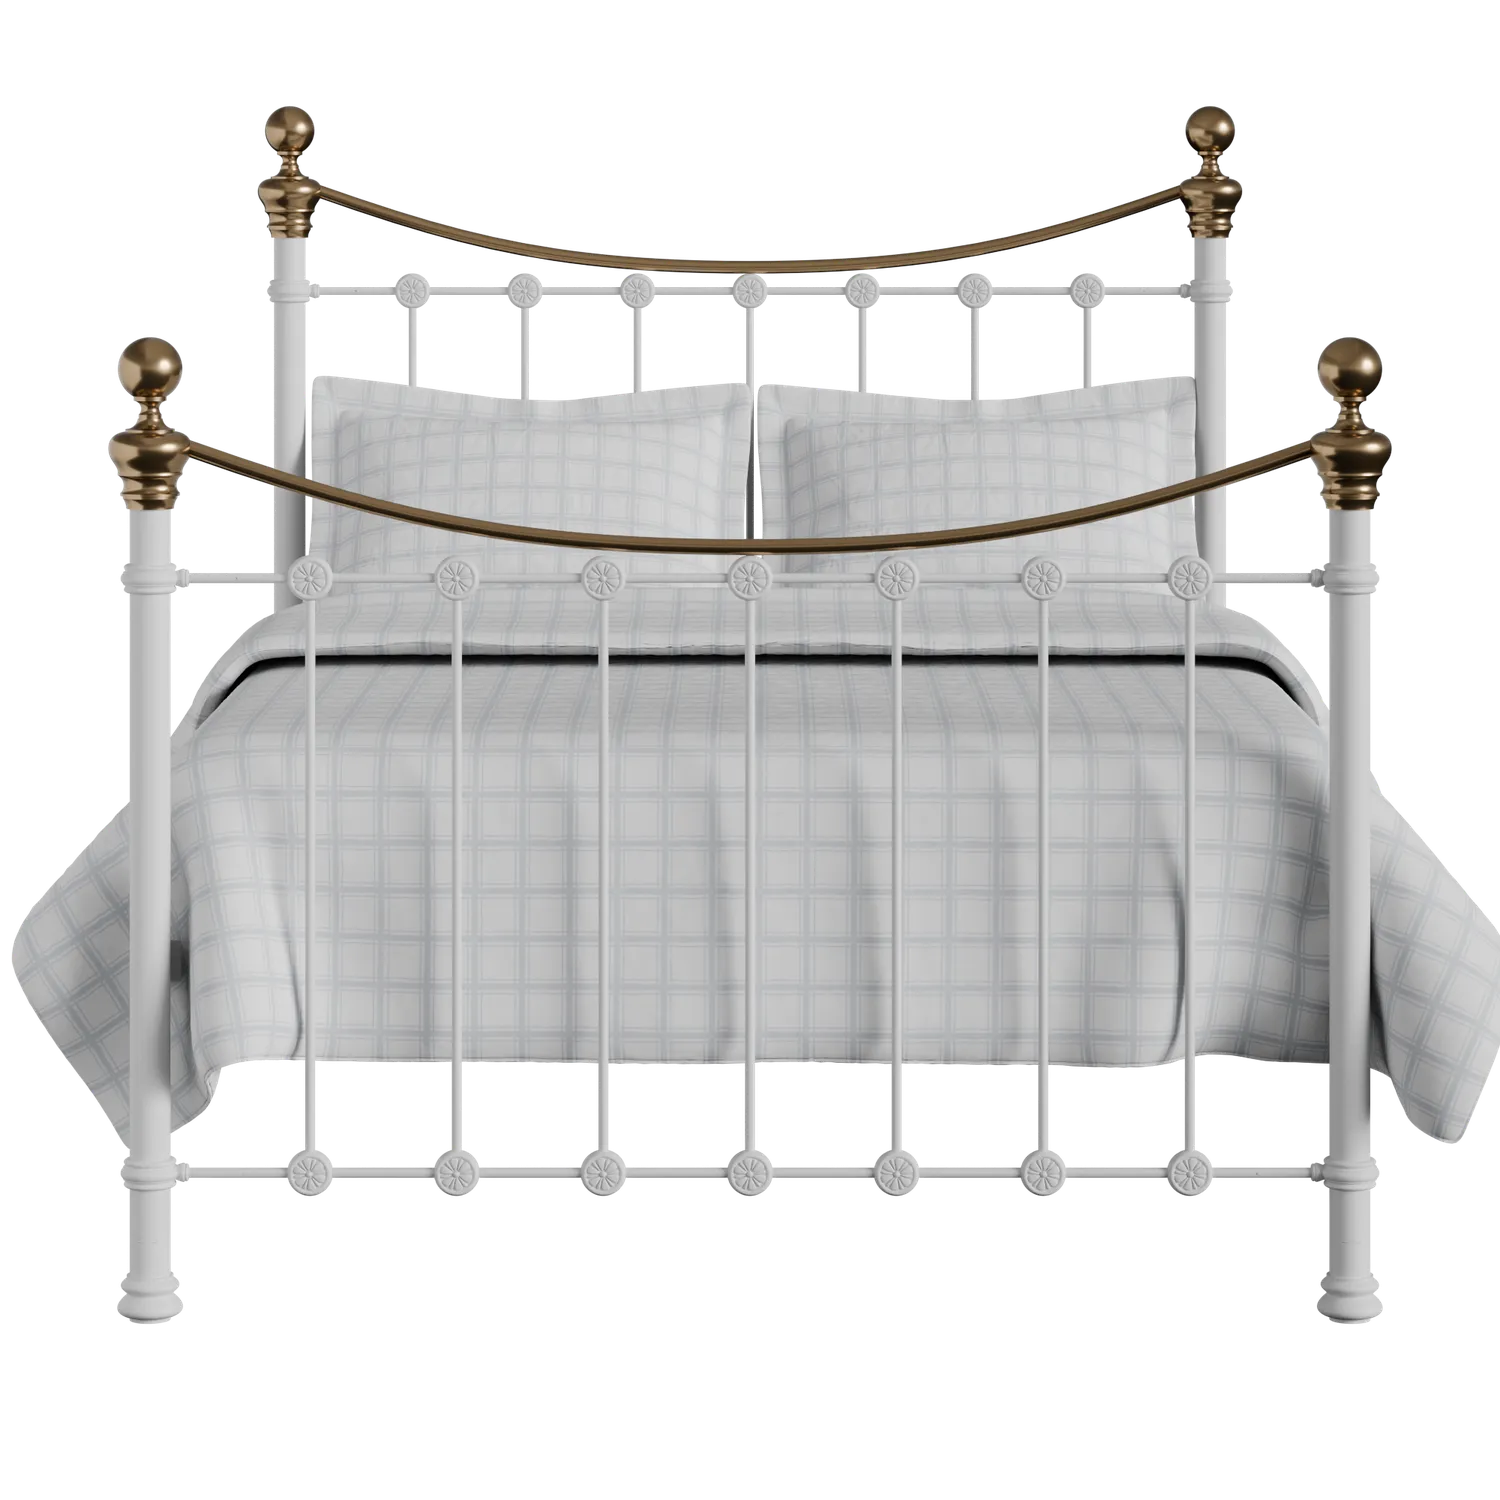 Selkirk iron/metal bed in white